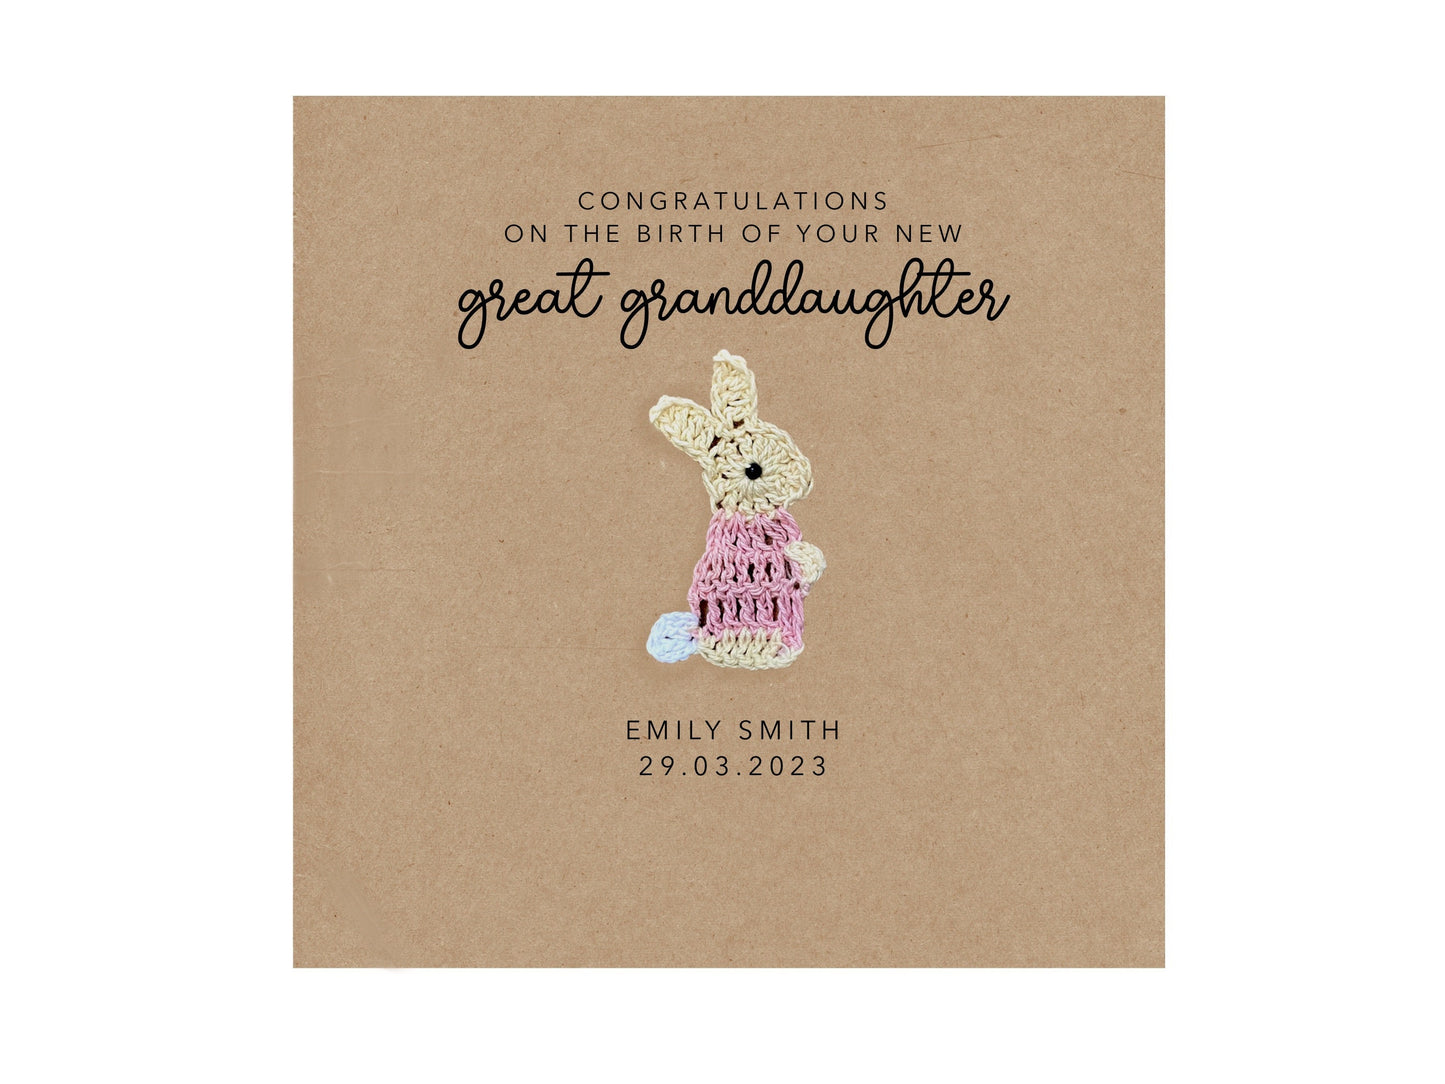 Personalised Congratulations Card For A Great Grandparent, Card For A New Grandma, Congratulations Birth On Your Great Granddaughter, Baby